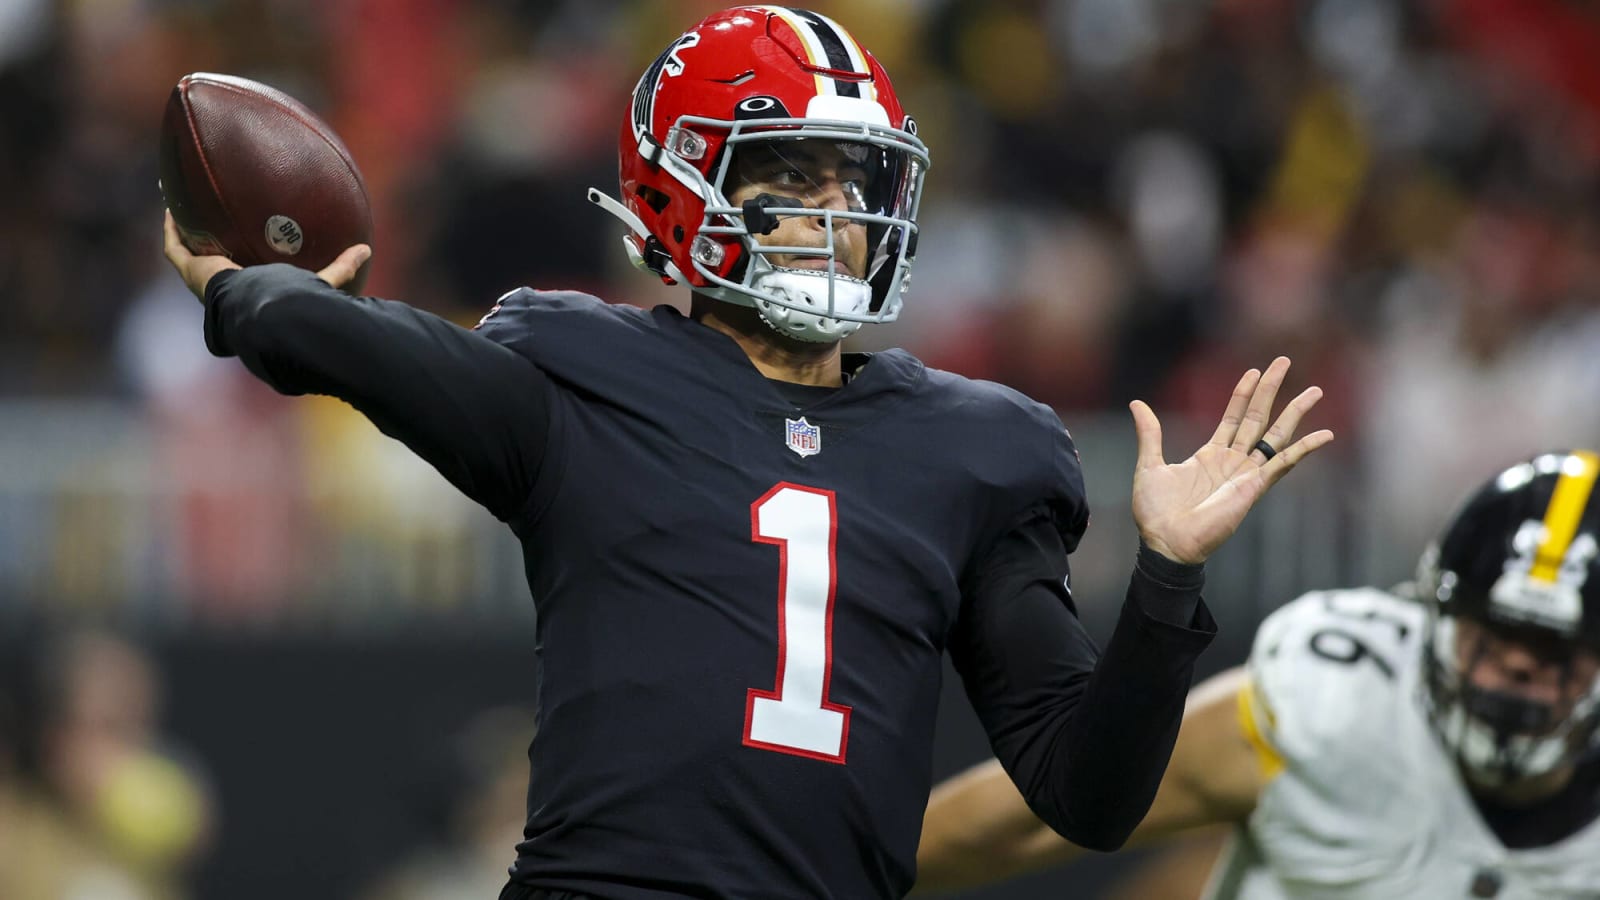 Netflix’s Quarterback enables Marcus Mariota to tell his side of leaving the Falcons